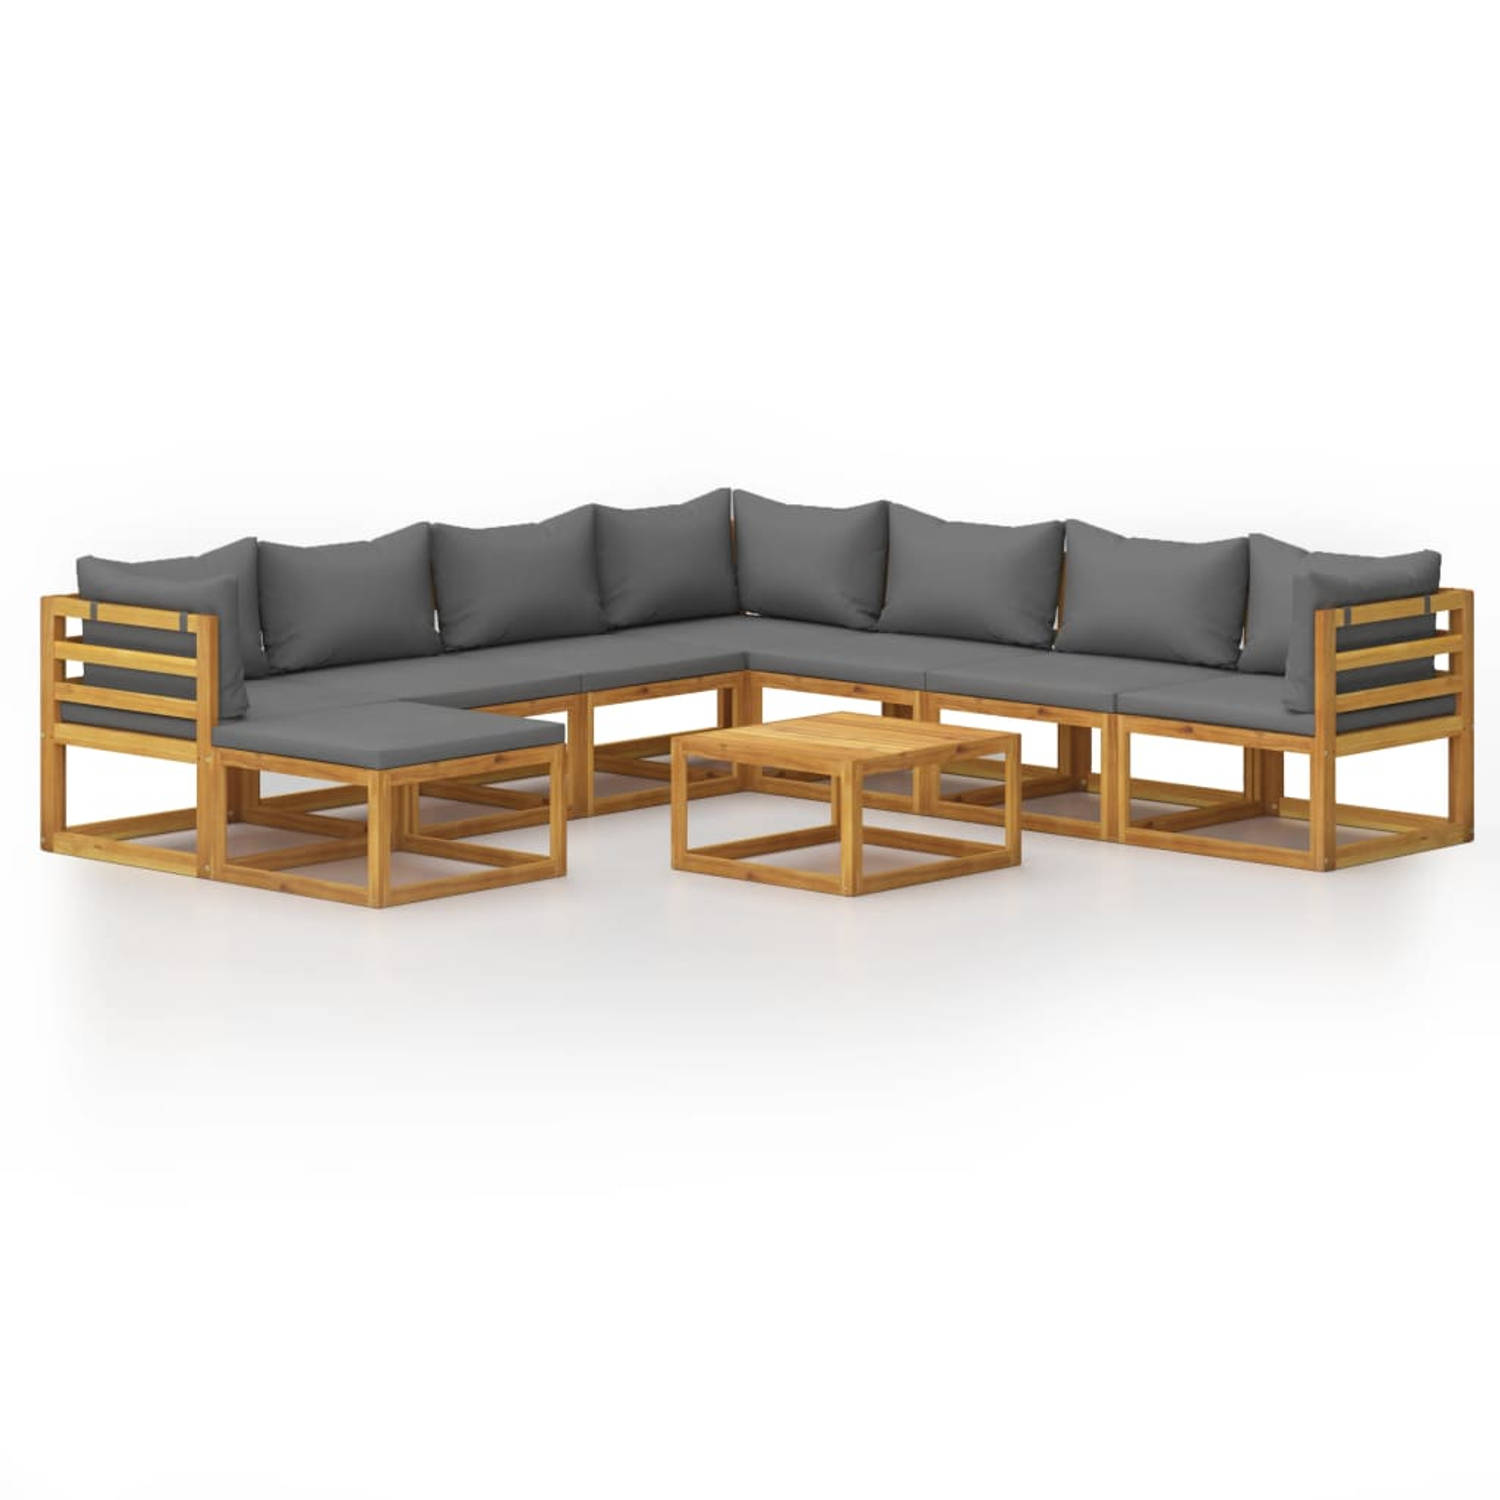 The Living Store 9-delige Loungeset met kussens massief acaciahout - Tuinset